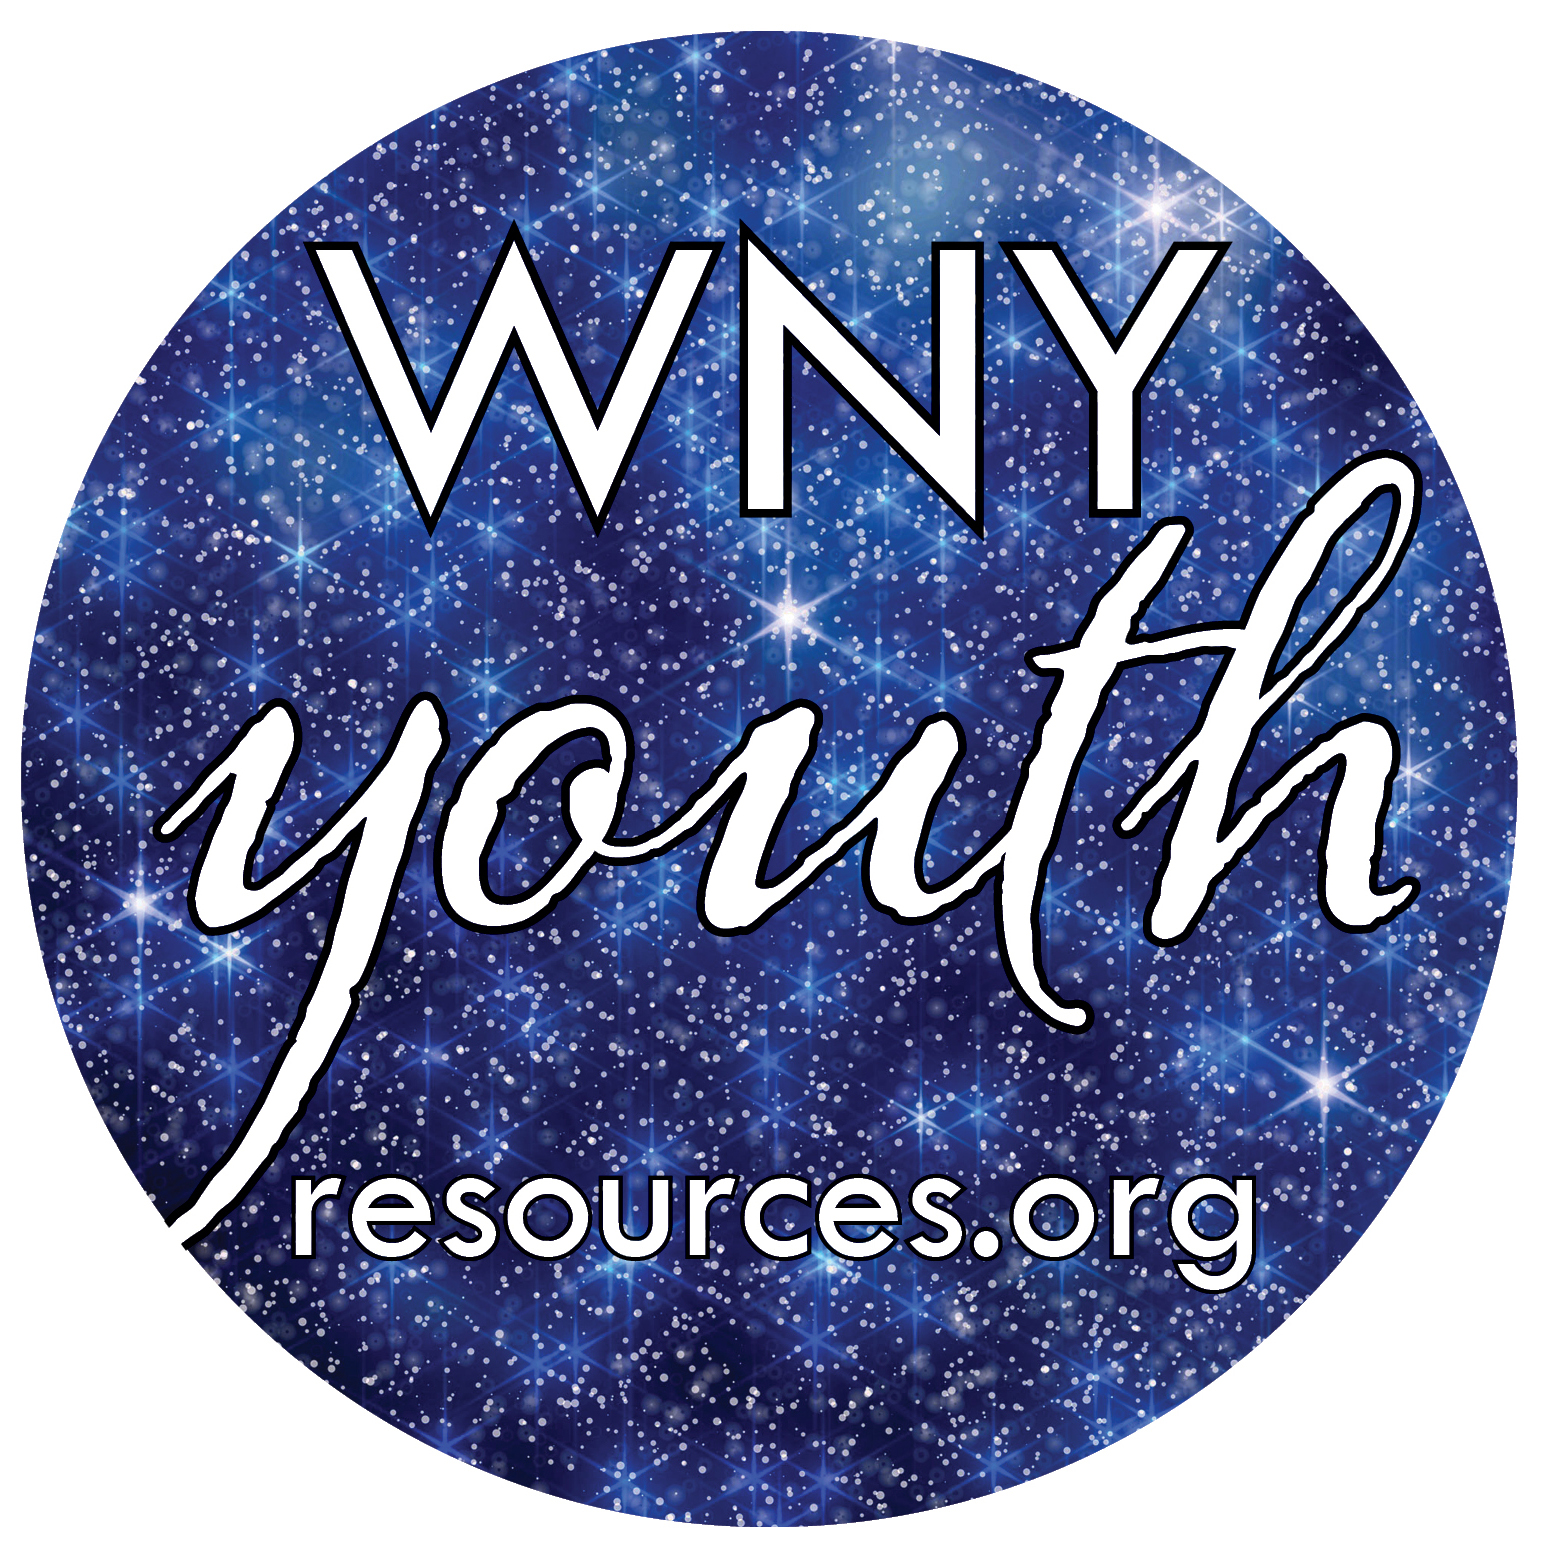 WNY youth resources